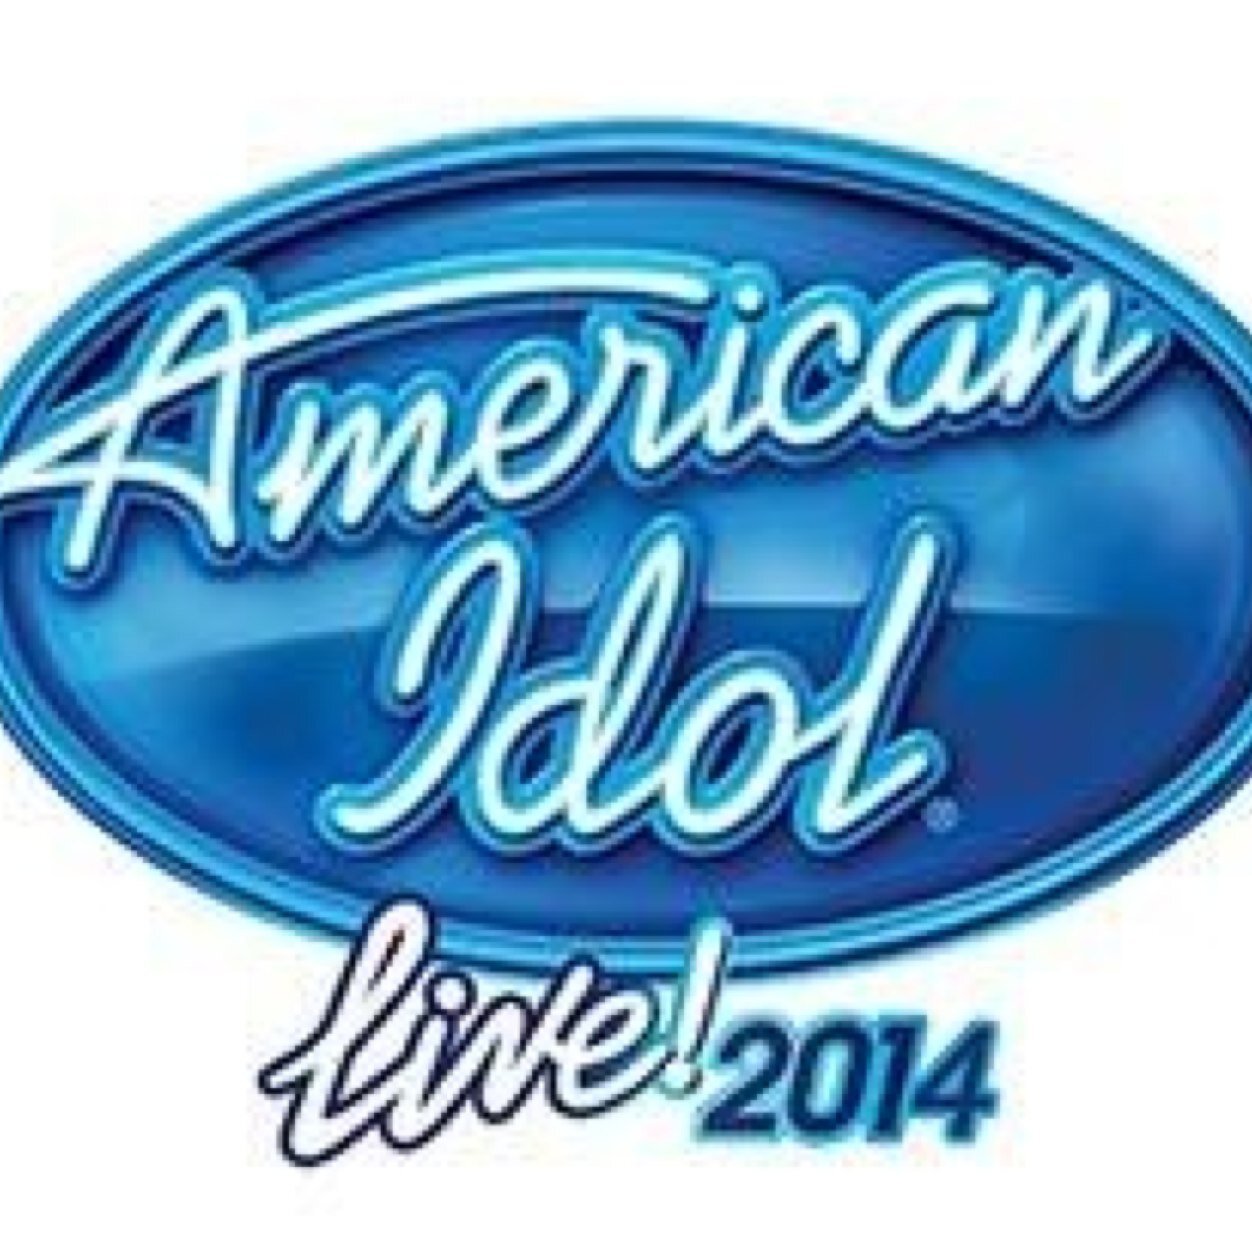 Welcome to American Idol Season 13 Retweet. Follow us for information and news involving the new season of American Idol. Idol Tour starts June 2014!